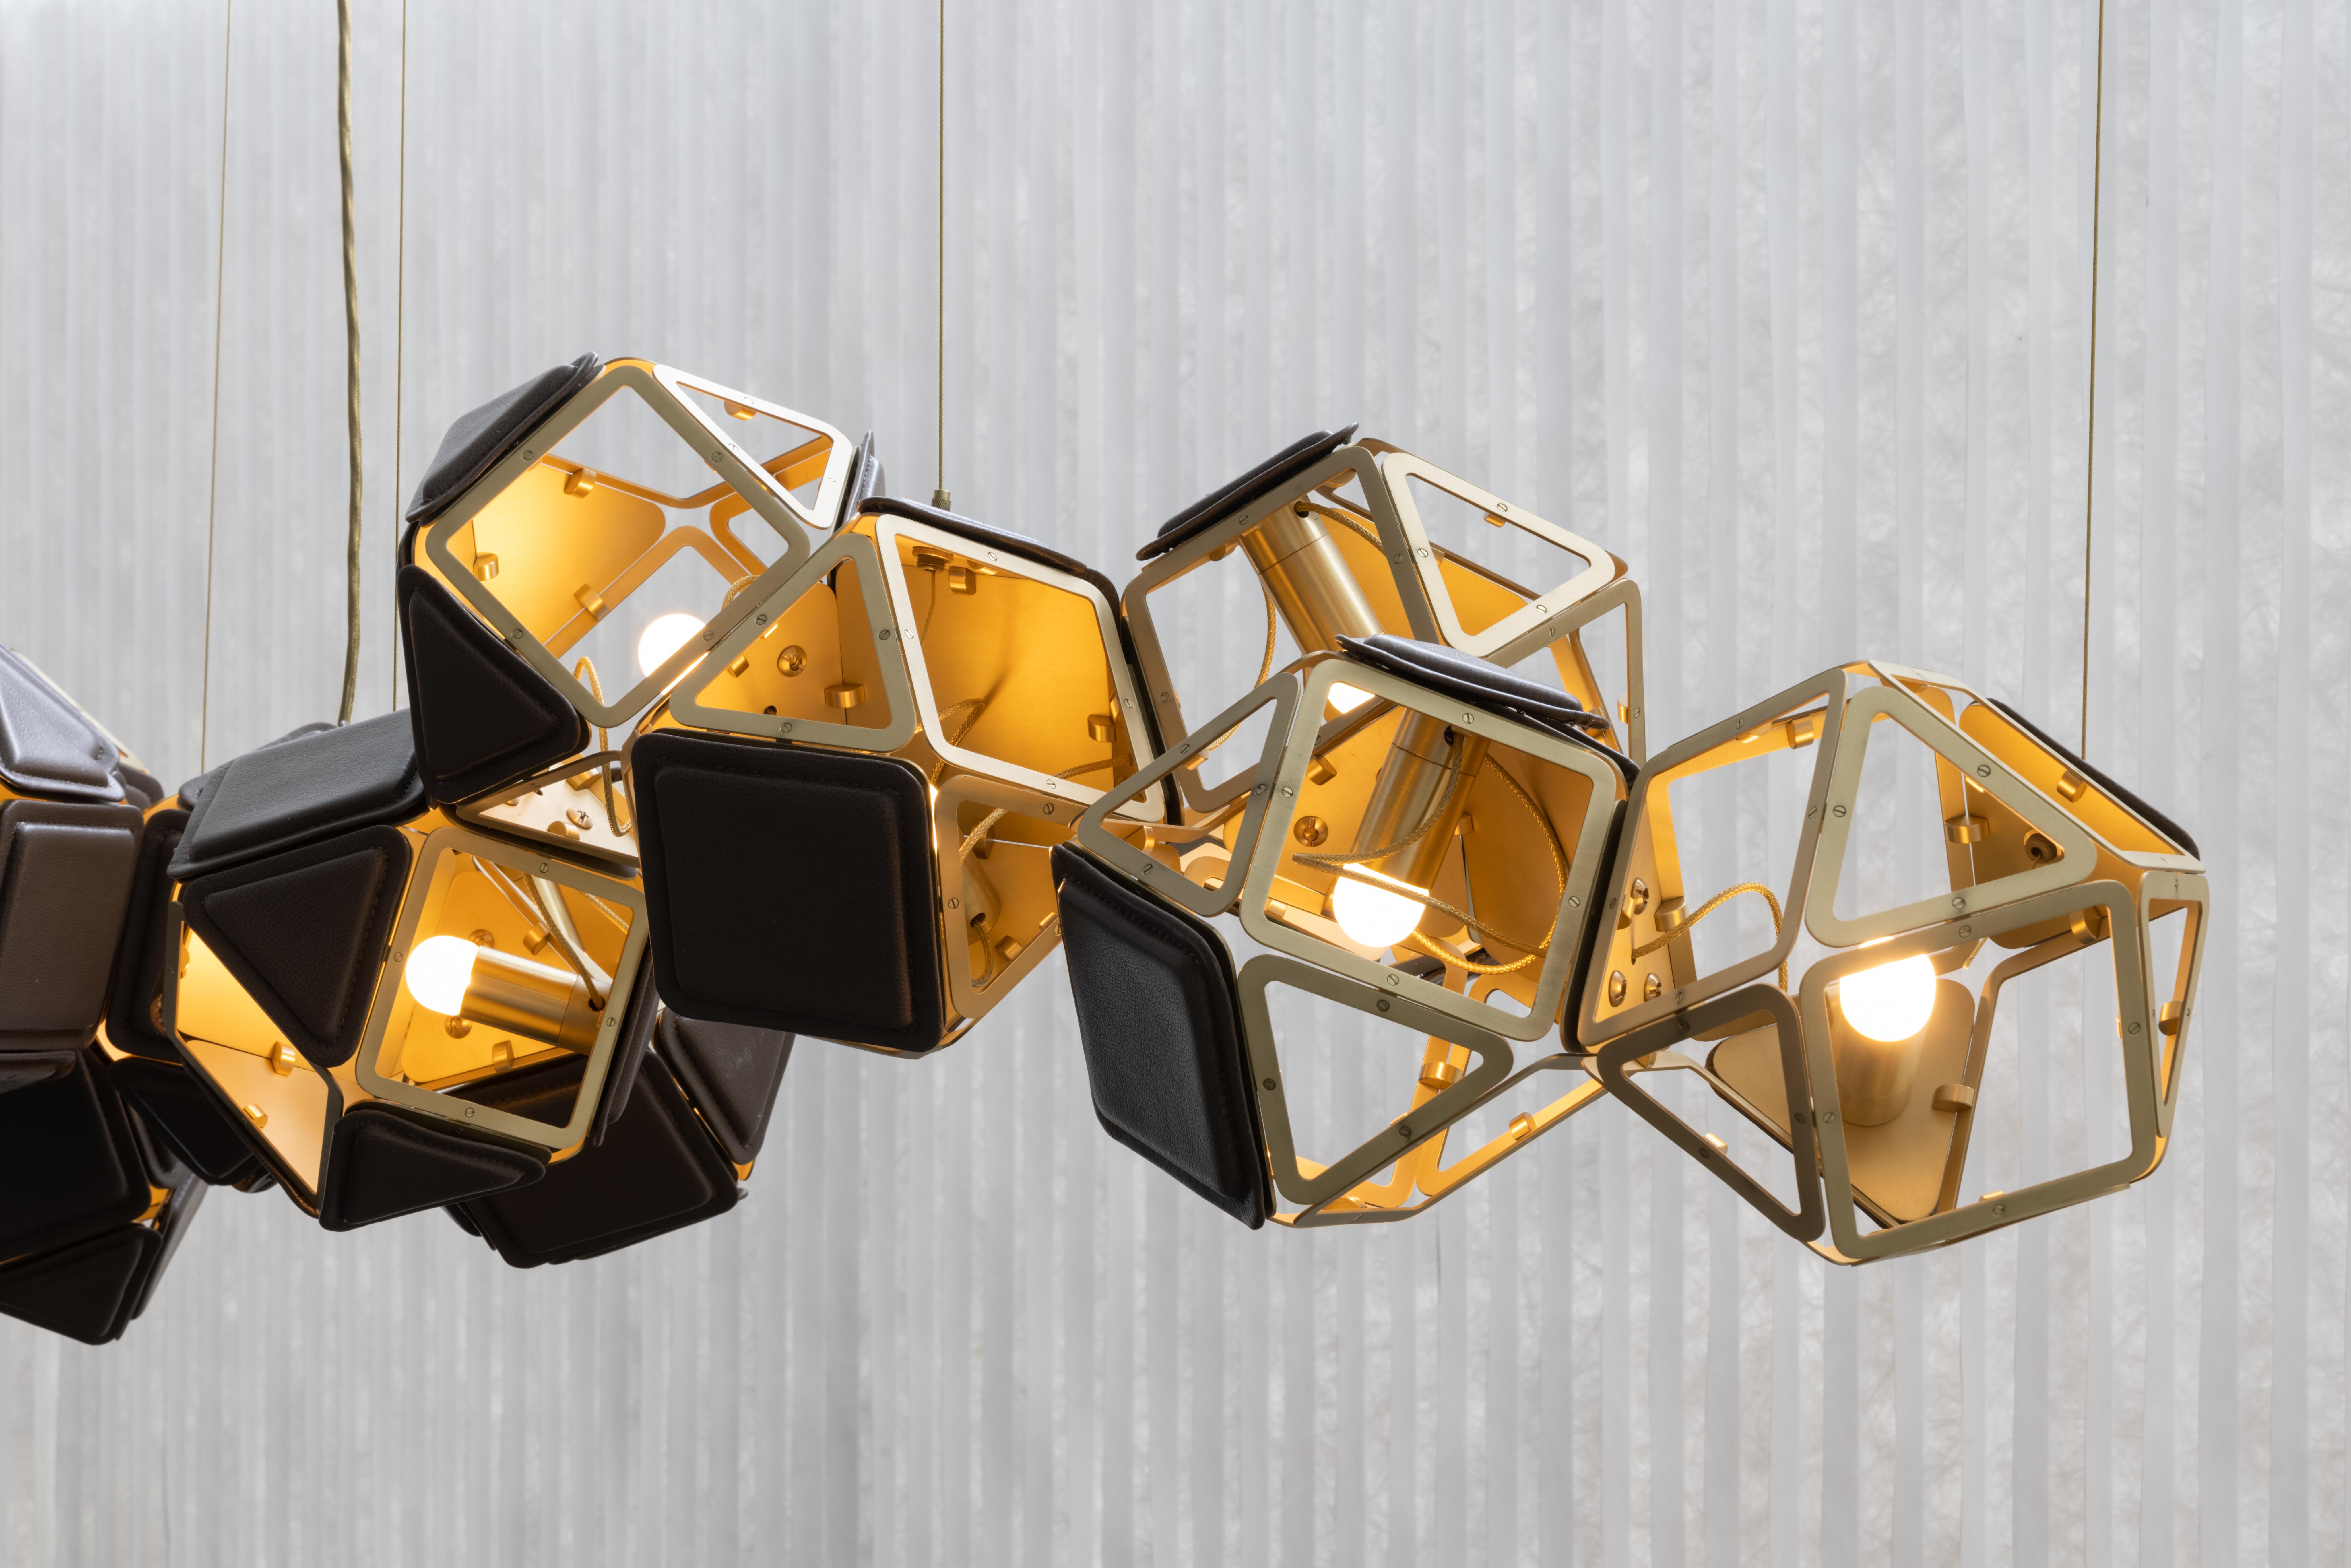 The Welles Long Chandelier 16 by Sybille de Margerie floats effortlessly, adding a sense of movement and dimension to any space. The capsule collection comprises a Long, Central and Vertical Chandelier, as well as a Triple Pendant and Single